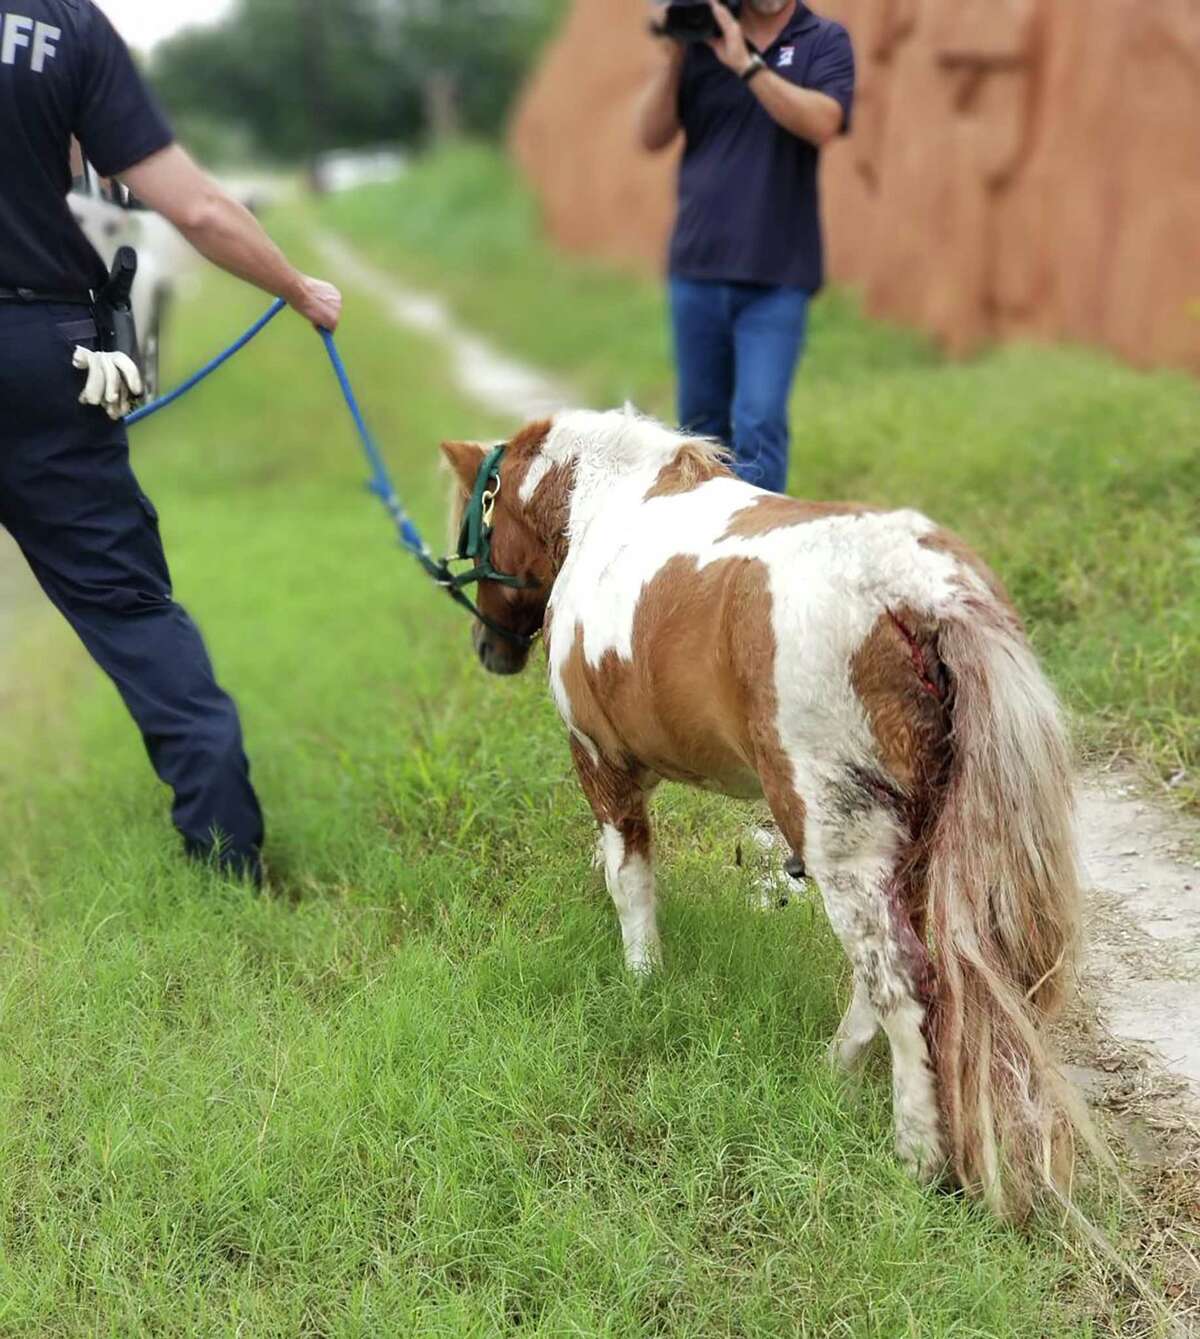 The pony had gashes on its hind legs after being rescued from the storm drain on Simsbrook Drive.